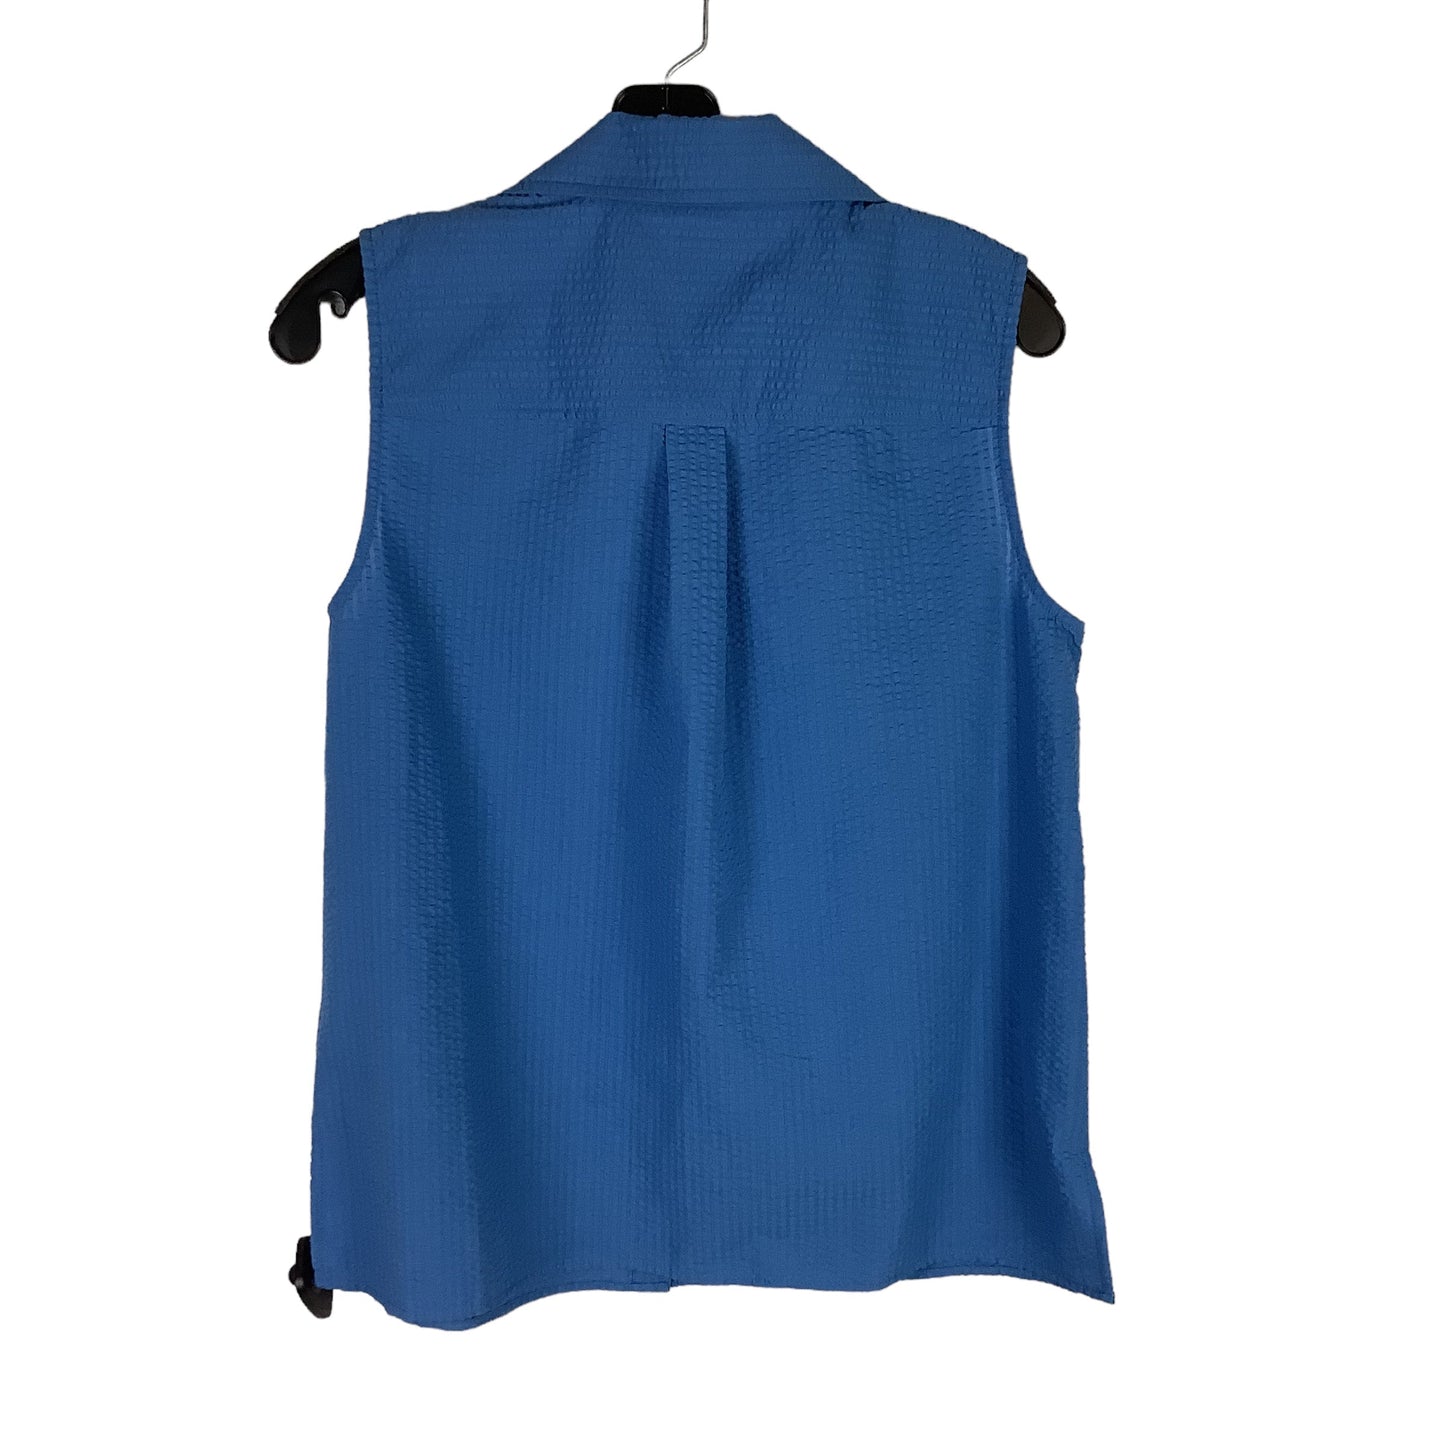 Top Sleeveless By Clothes Mentor  Size: M